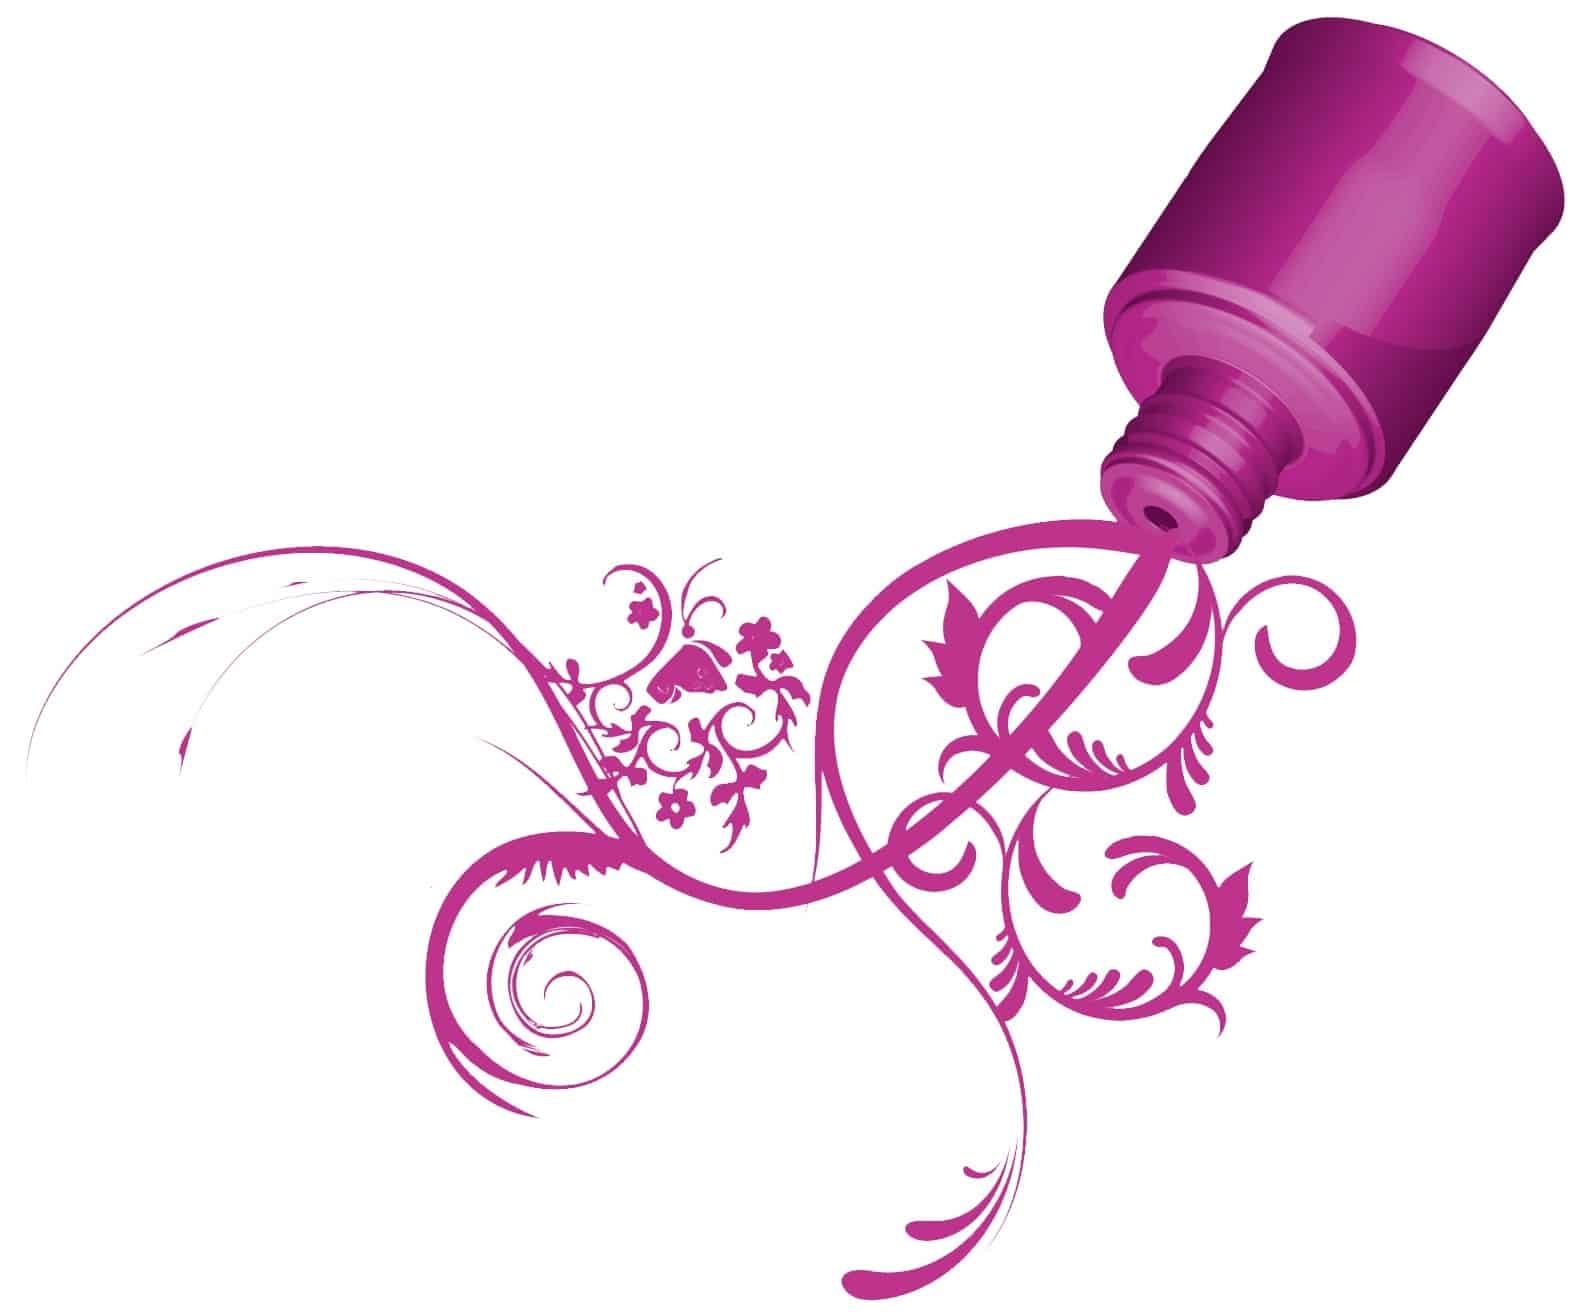 4. Free Nail Polish Clipart and Vector Graphics - Clipart.me - wide 1